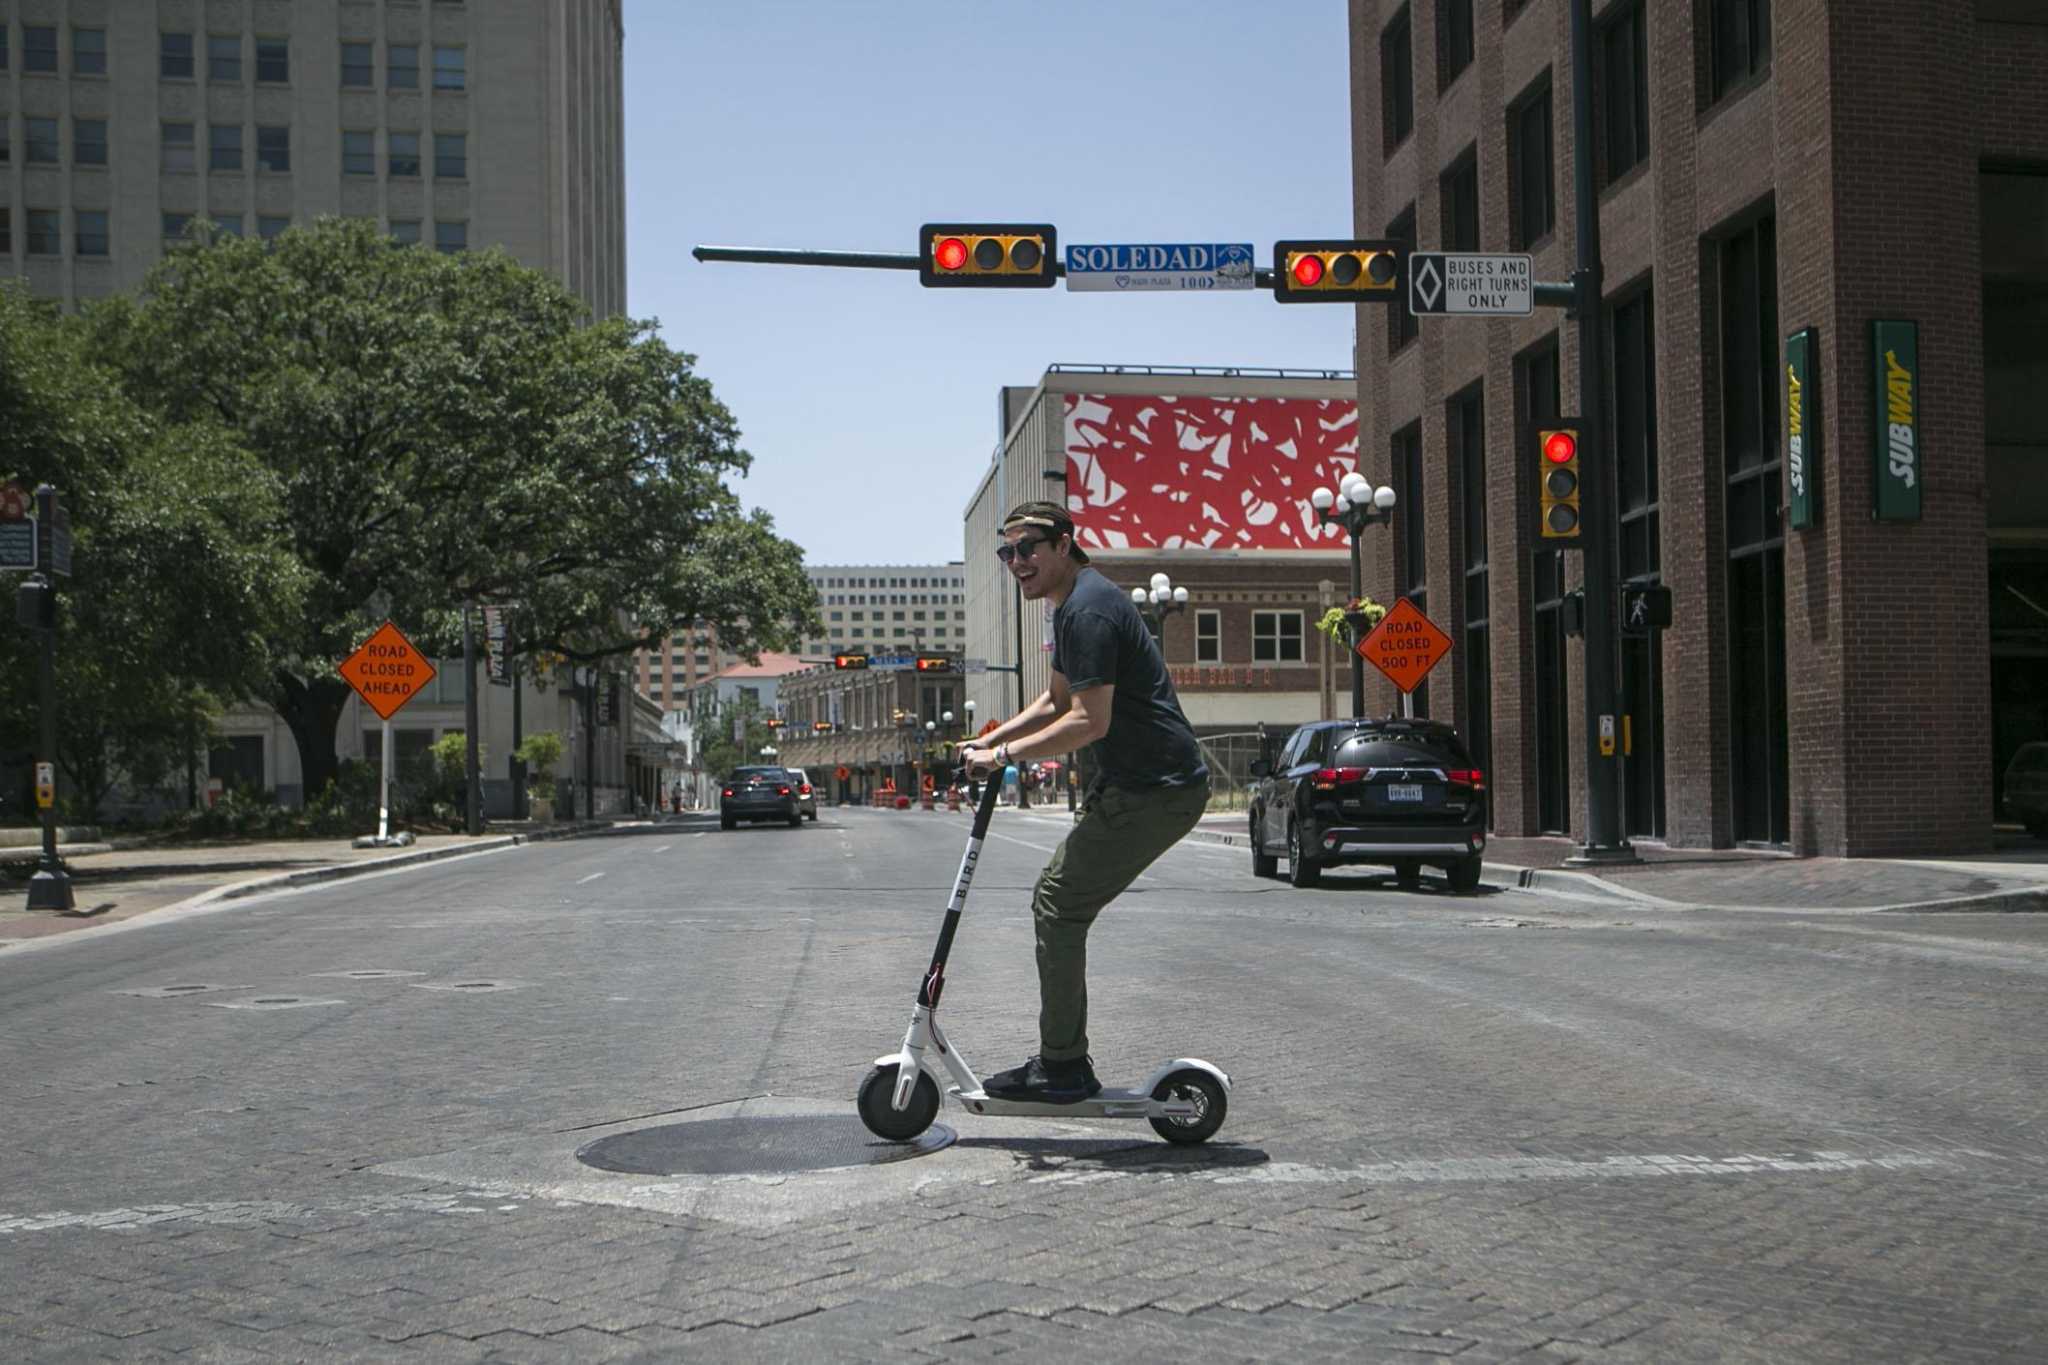 As escooters attract riders in San Antonio, officials look to regulate